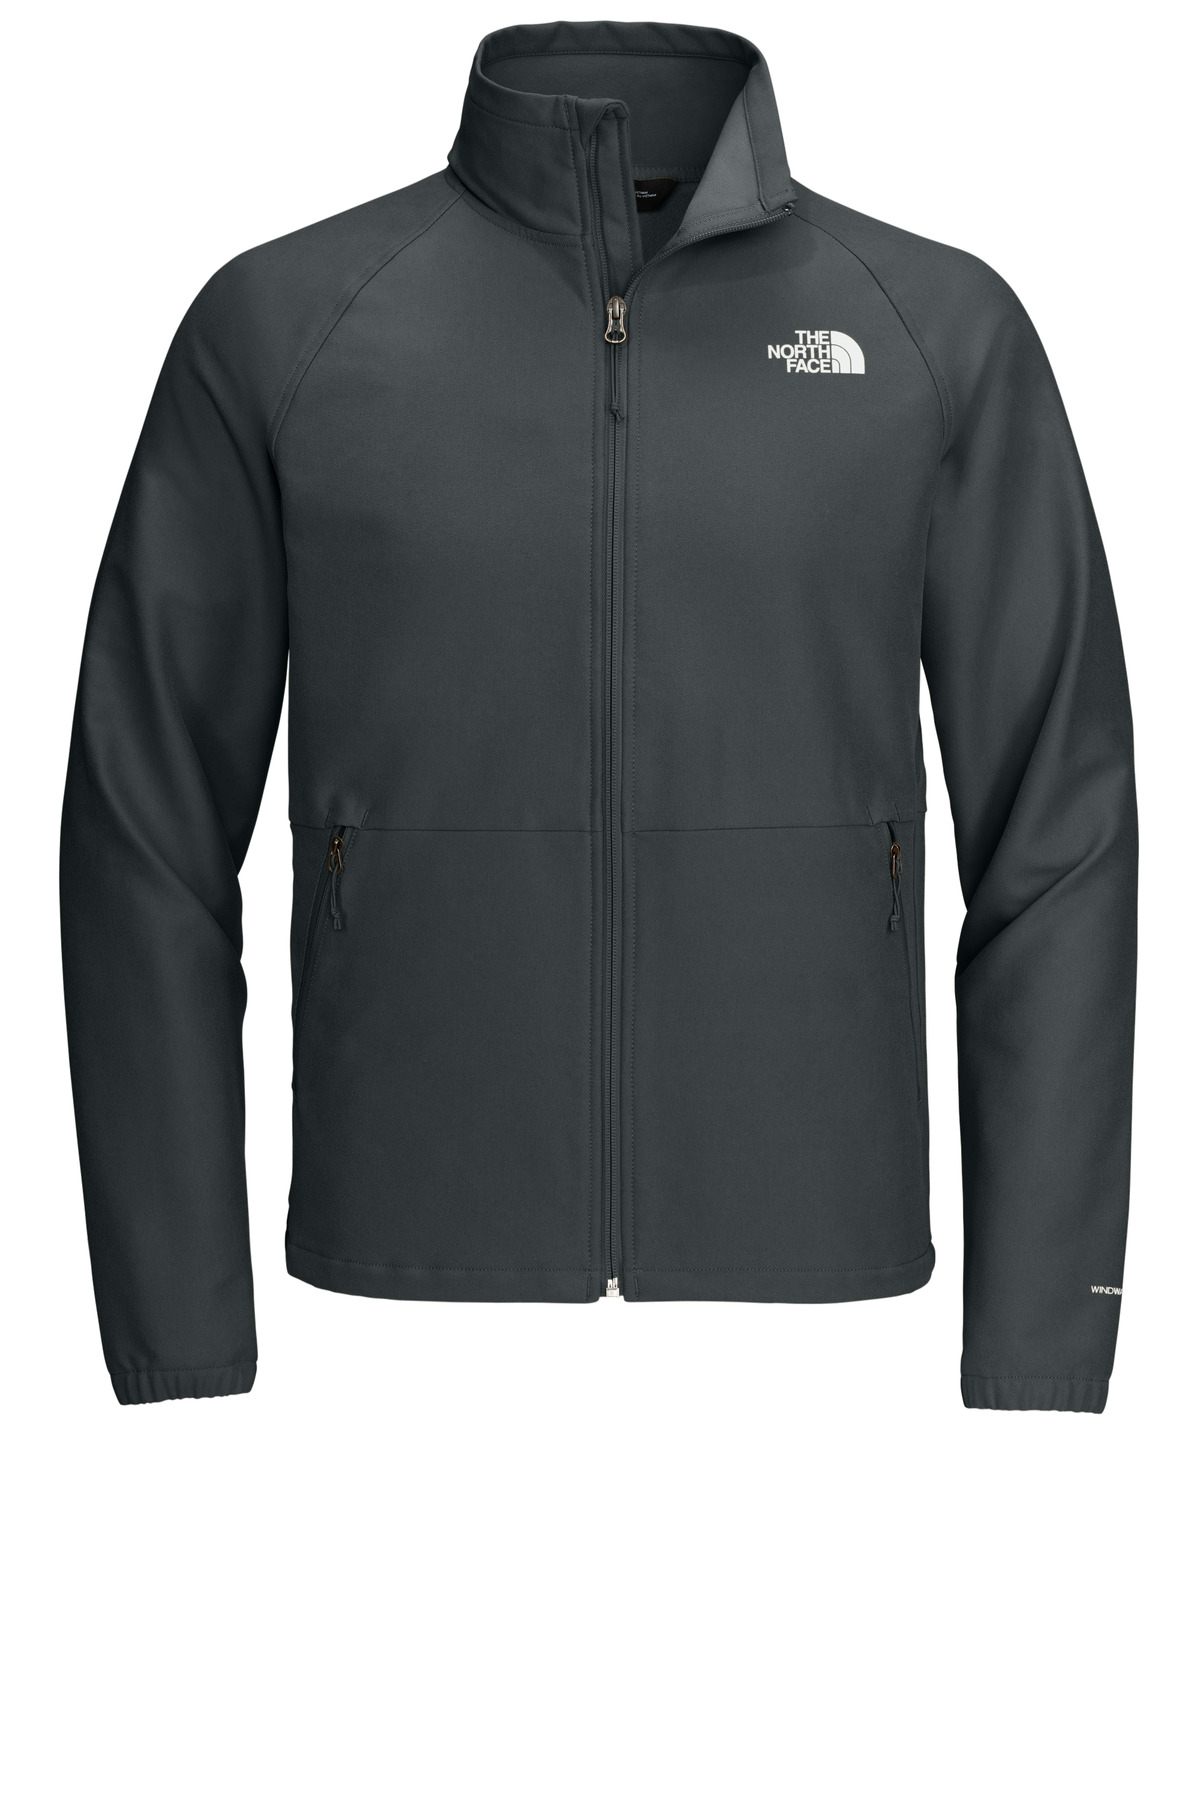 The North Face Barr Lake Soft Shell Jacket-The North Face